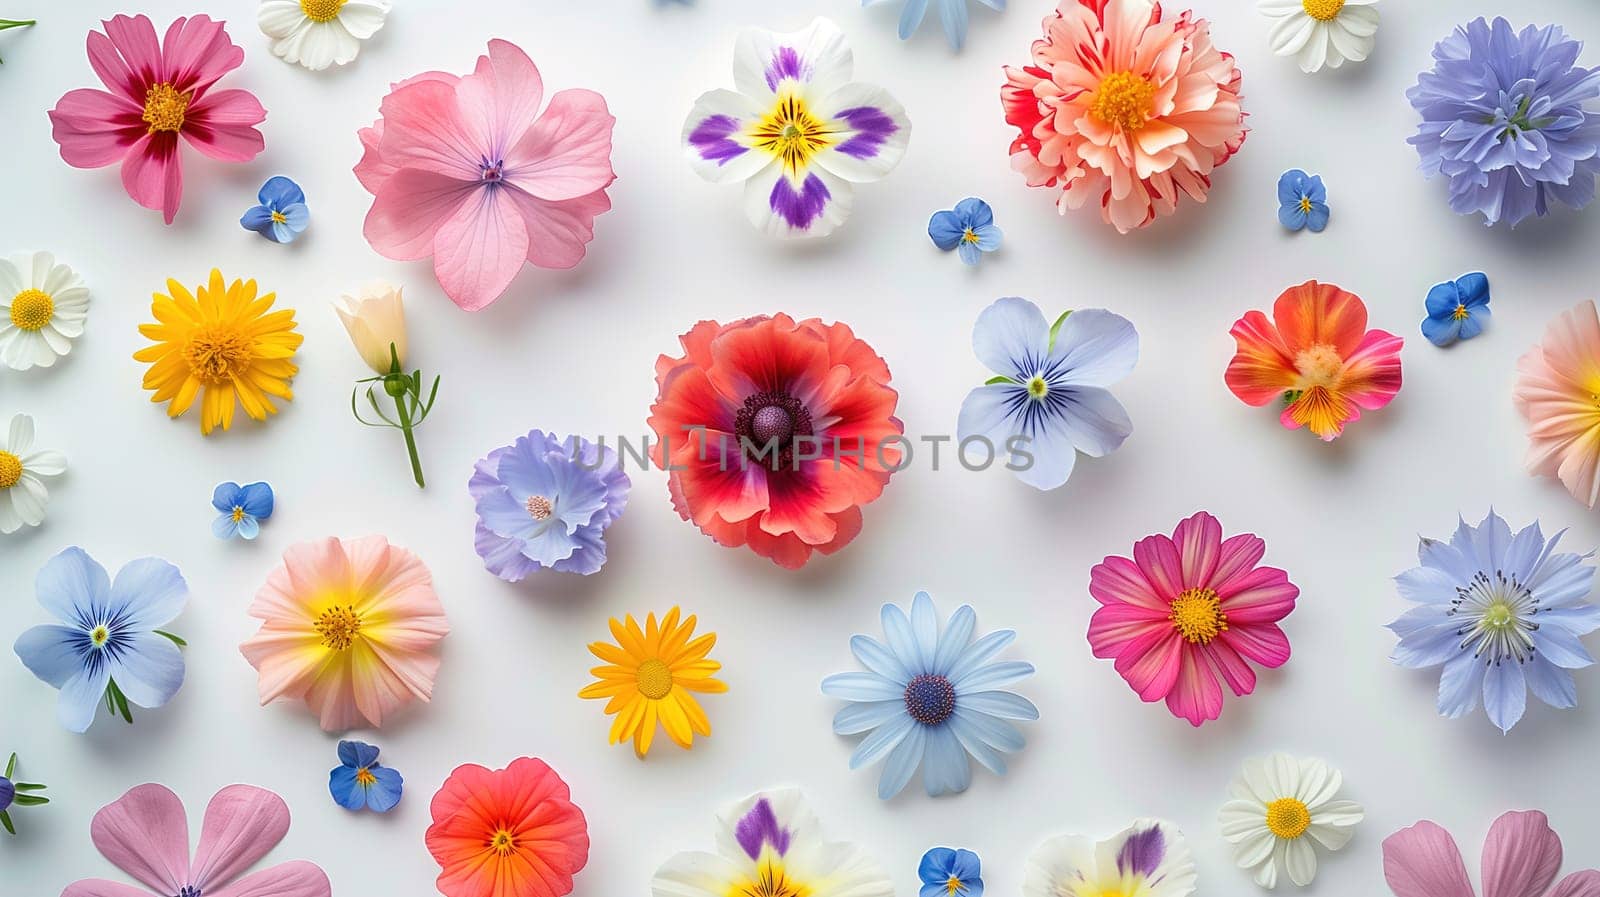 Assorted Colored Flowers on White Background by TRMK